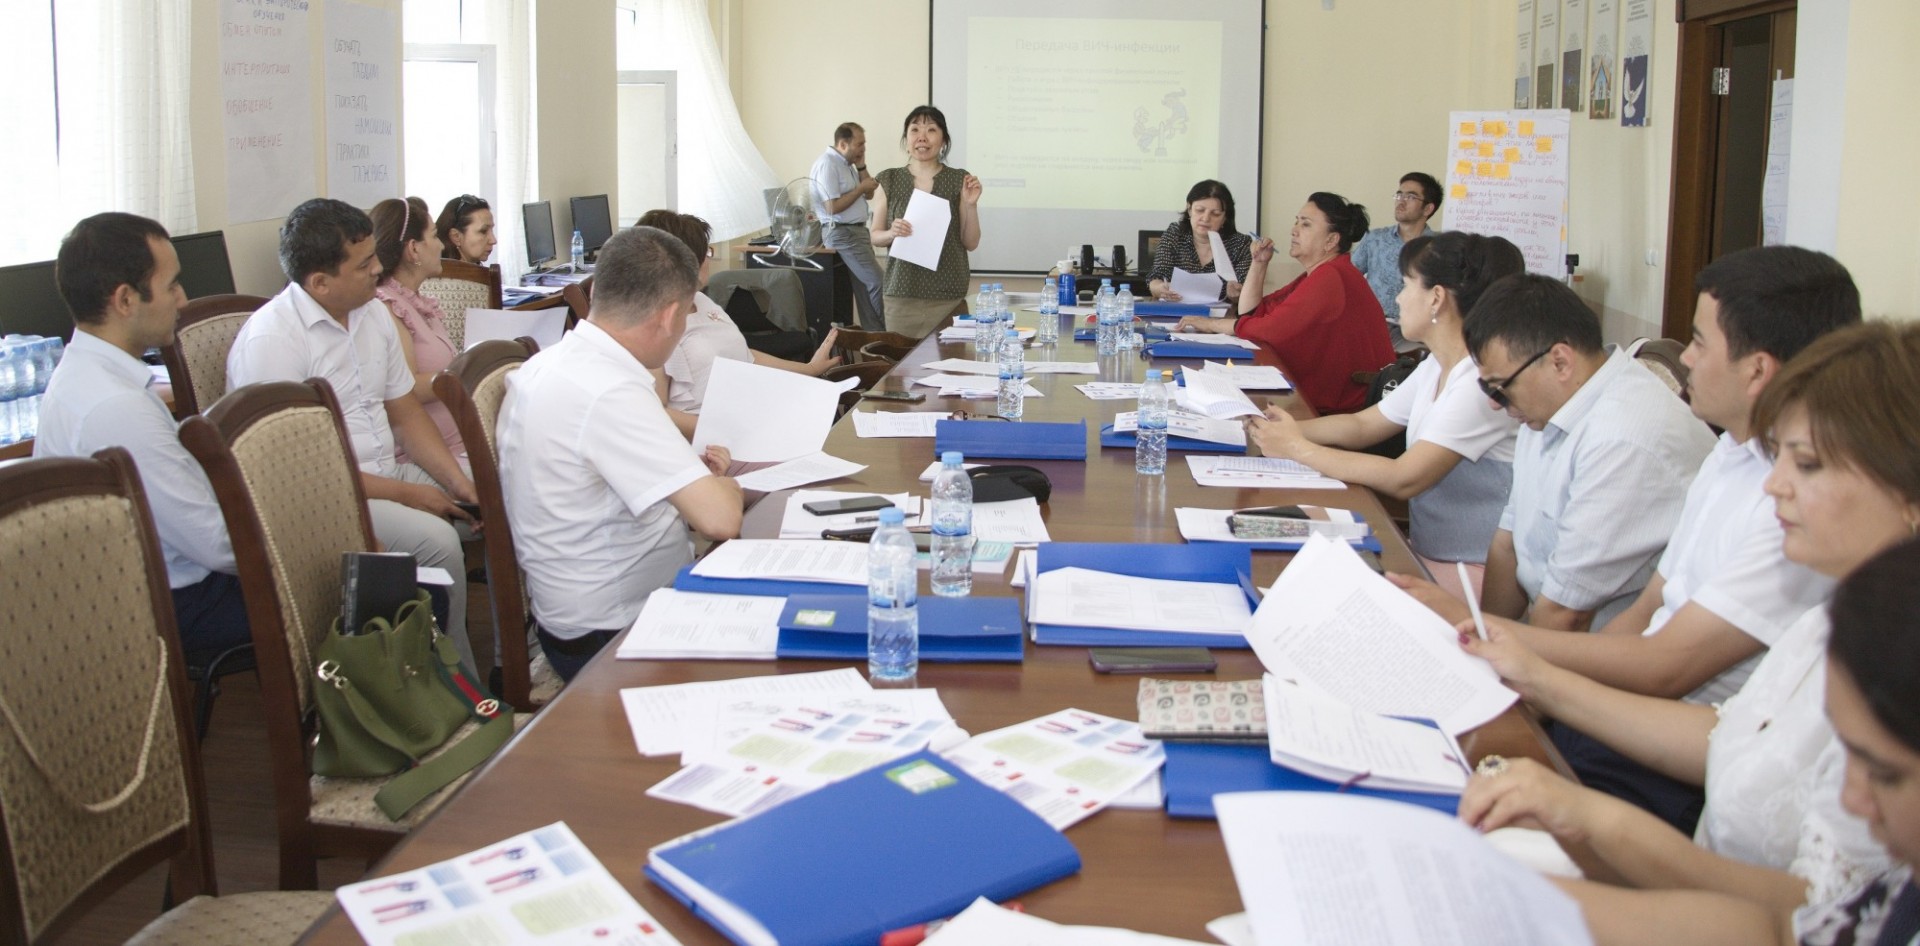 USWEEP Project Manager Lyudmila Kim delivers training to a full table of participants